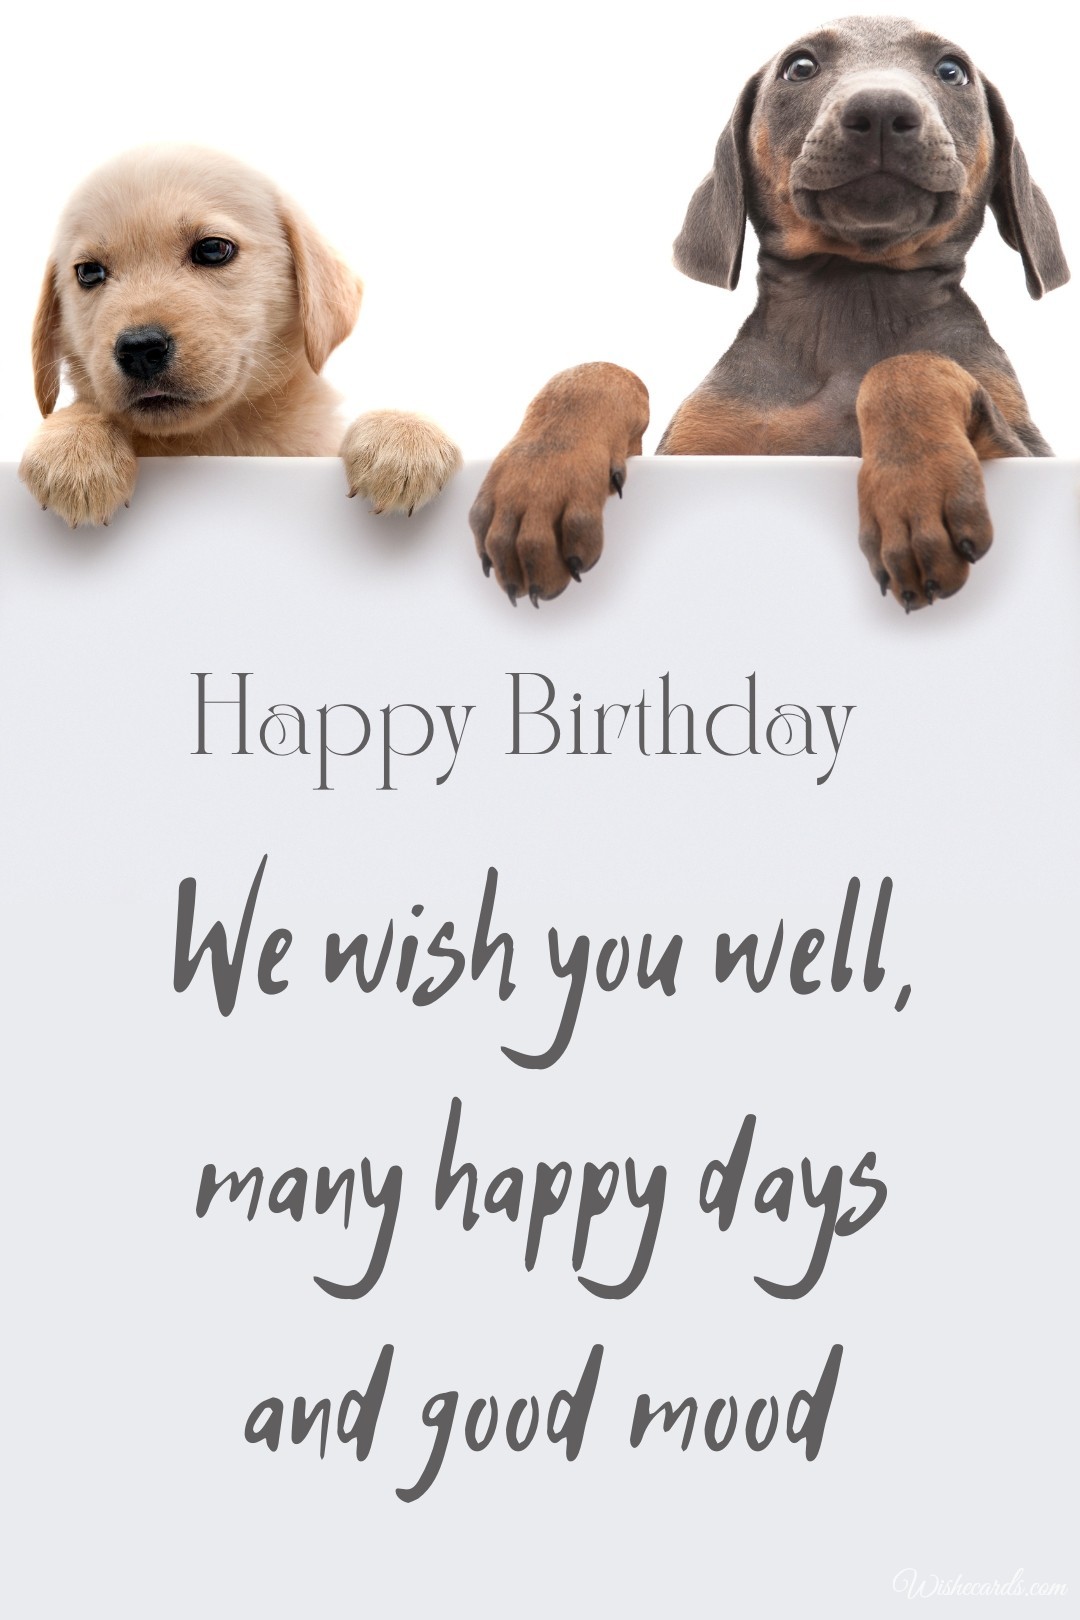 Happy Birthday Card For Woman With Dog